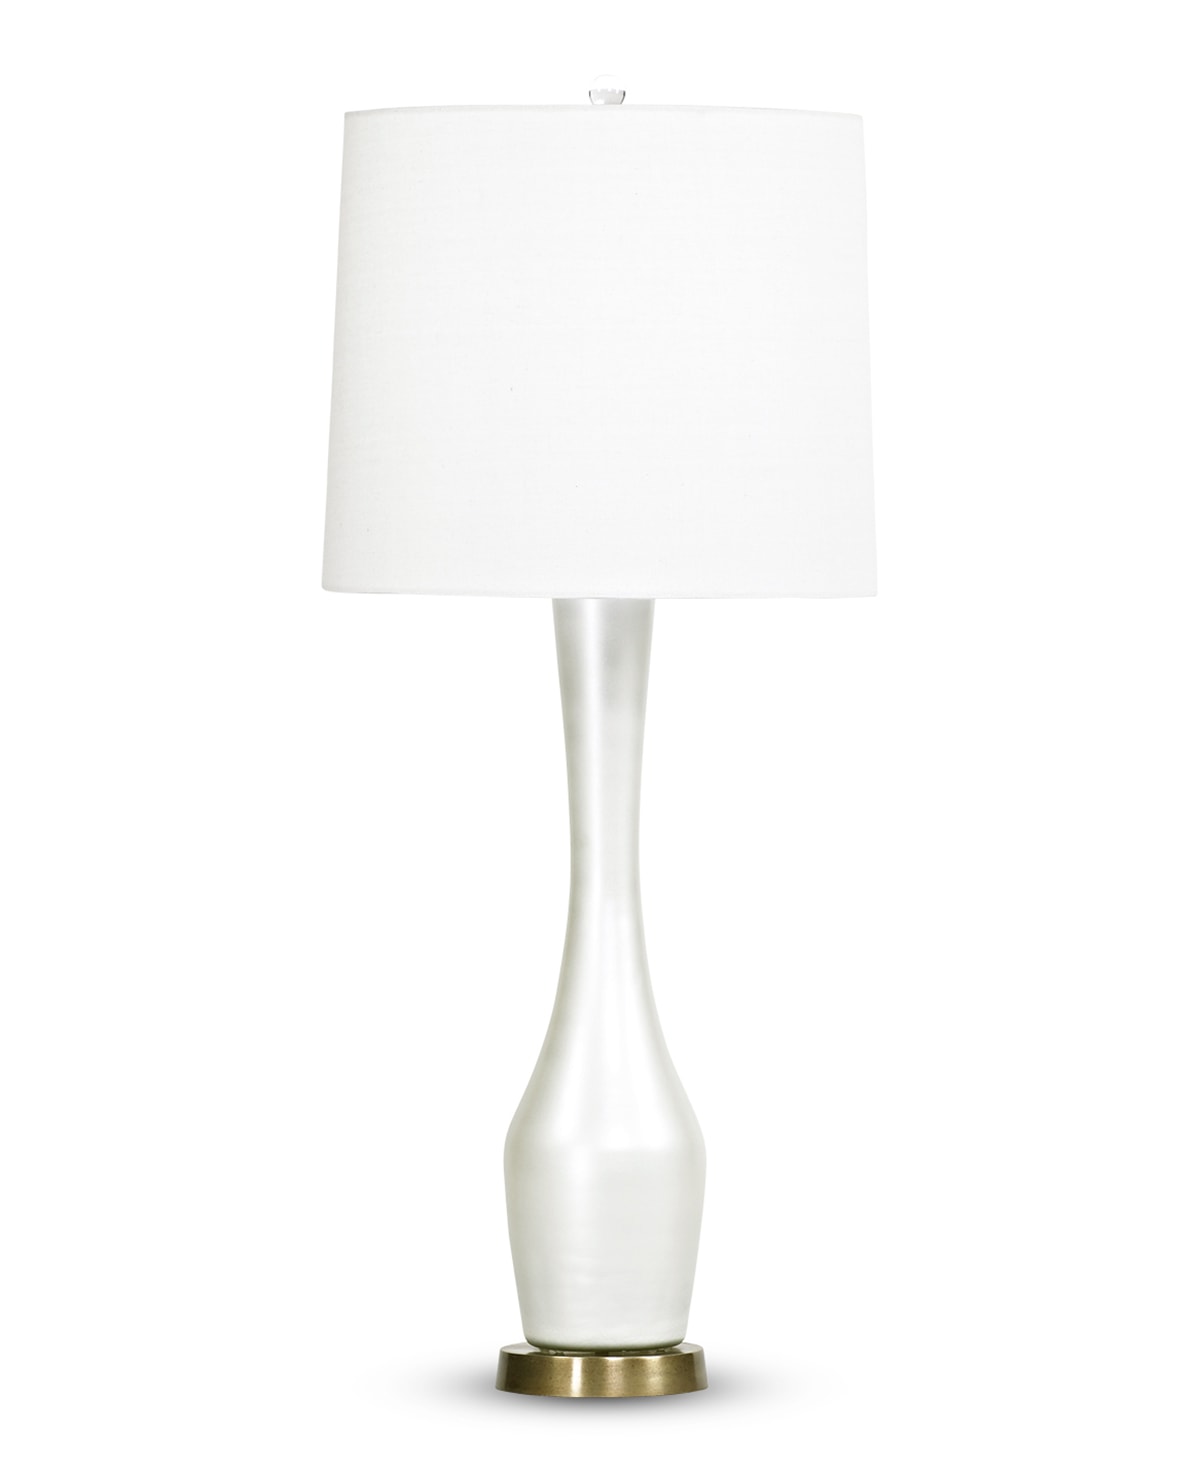 FlowDecor Carnation Table Lamp in mouth-blown glass with pearlescent cream finish and metal with antique brass finish and off-white linen tapered drum shade (# 3721)